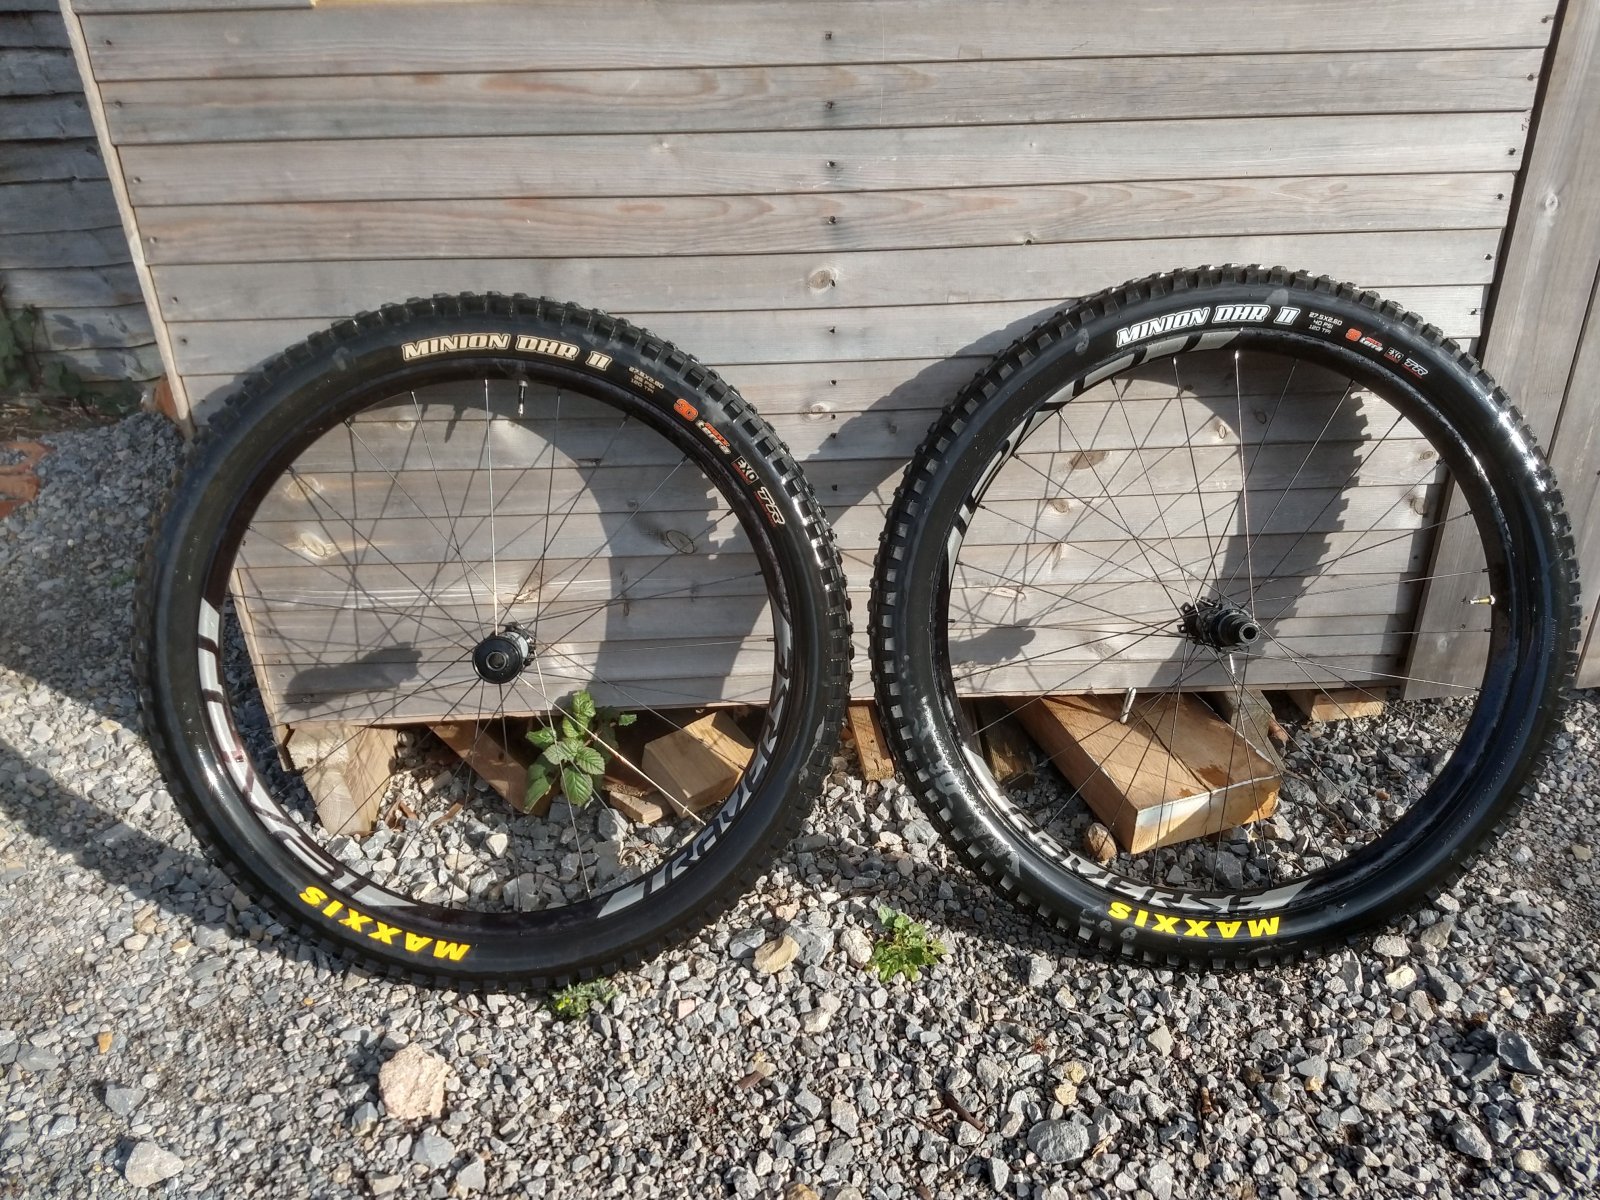 roval wheels for sale